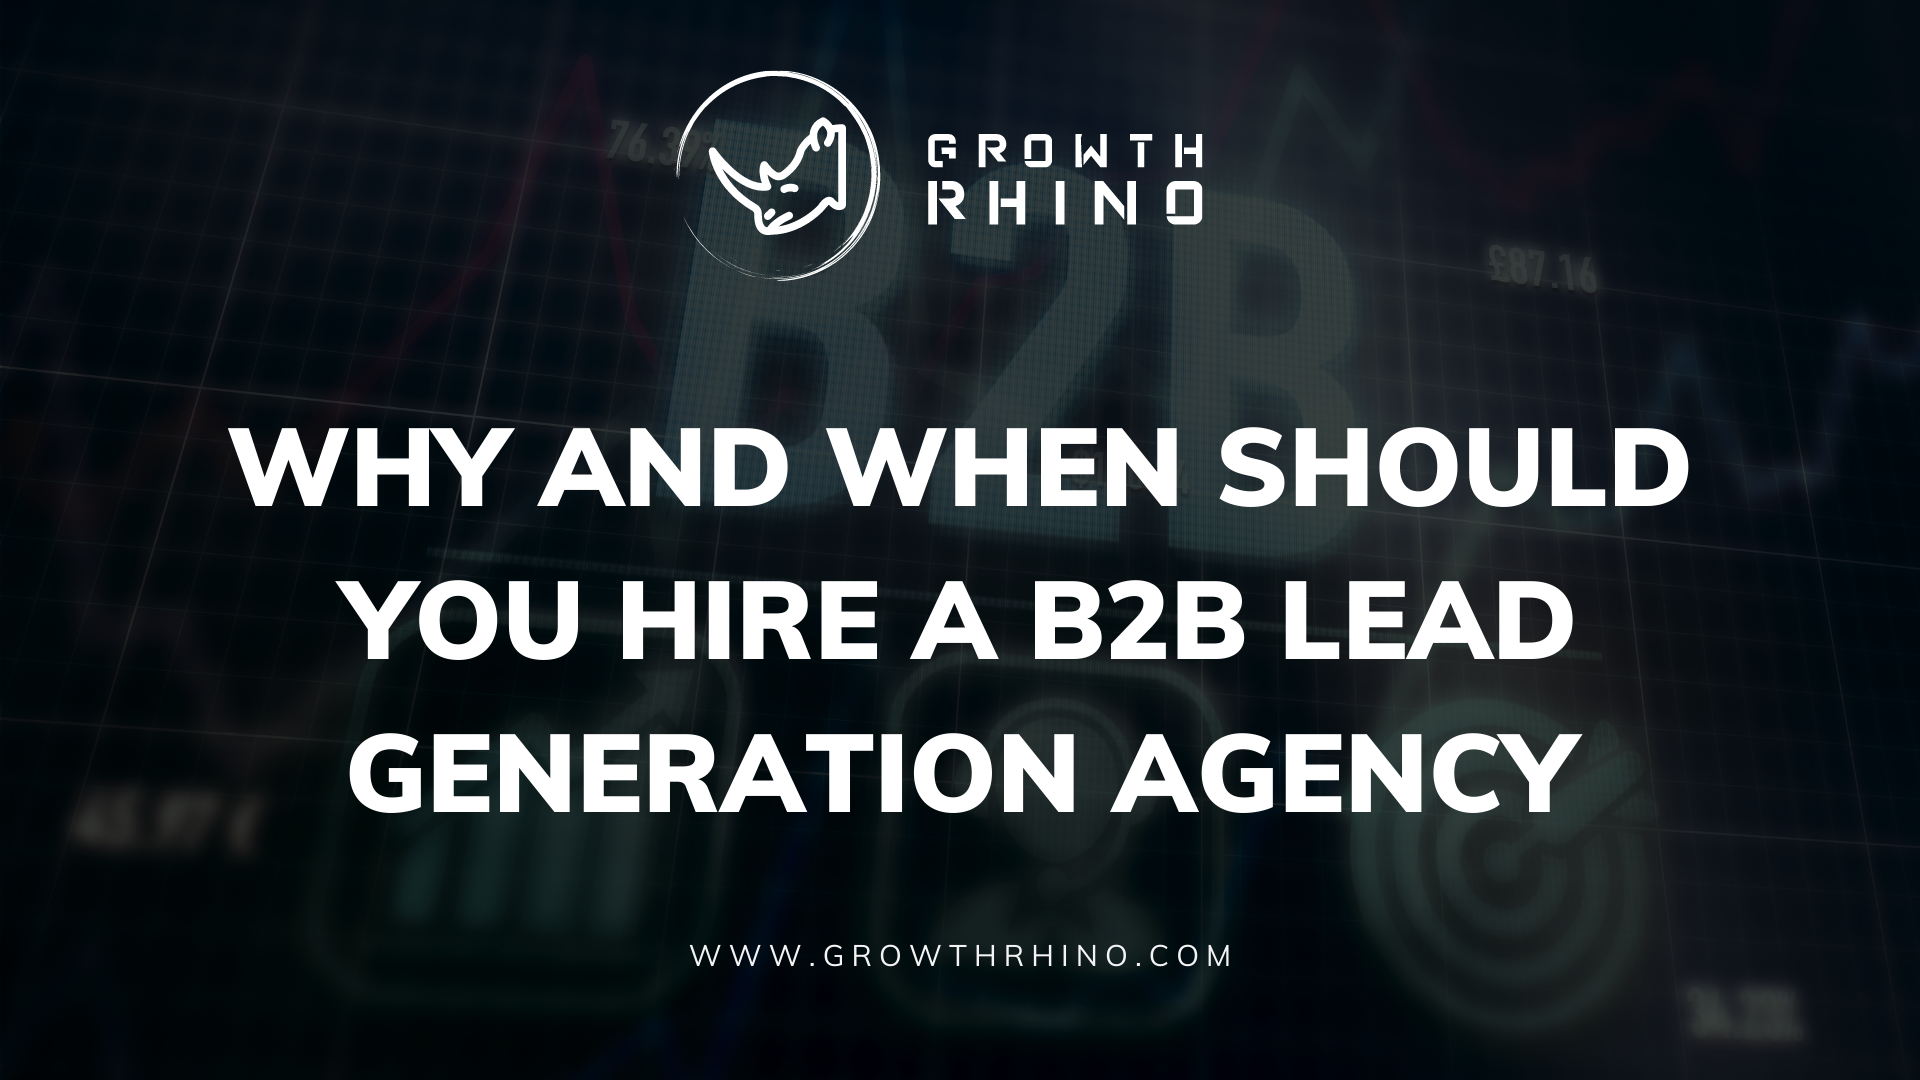 Why And When Should You Hire A B2b Lead Generation Agency?